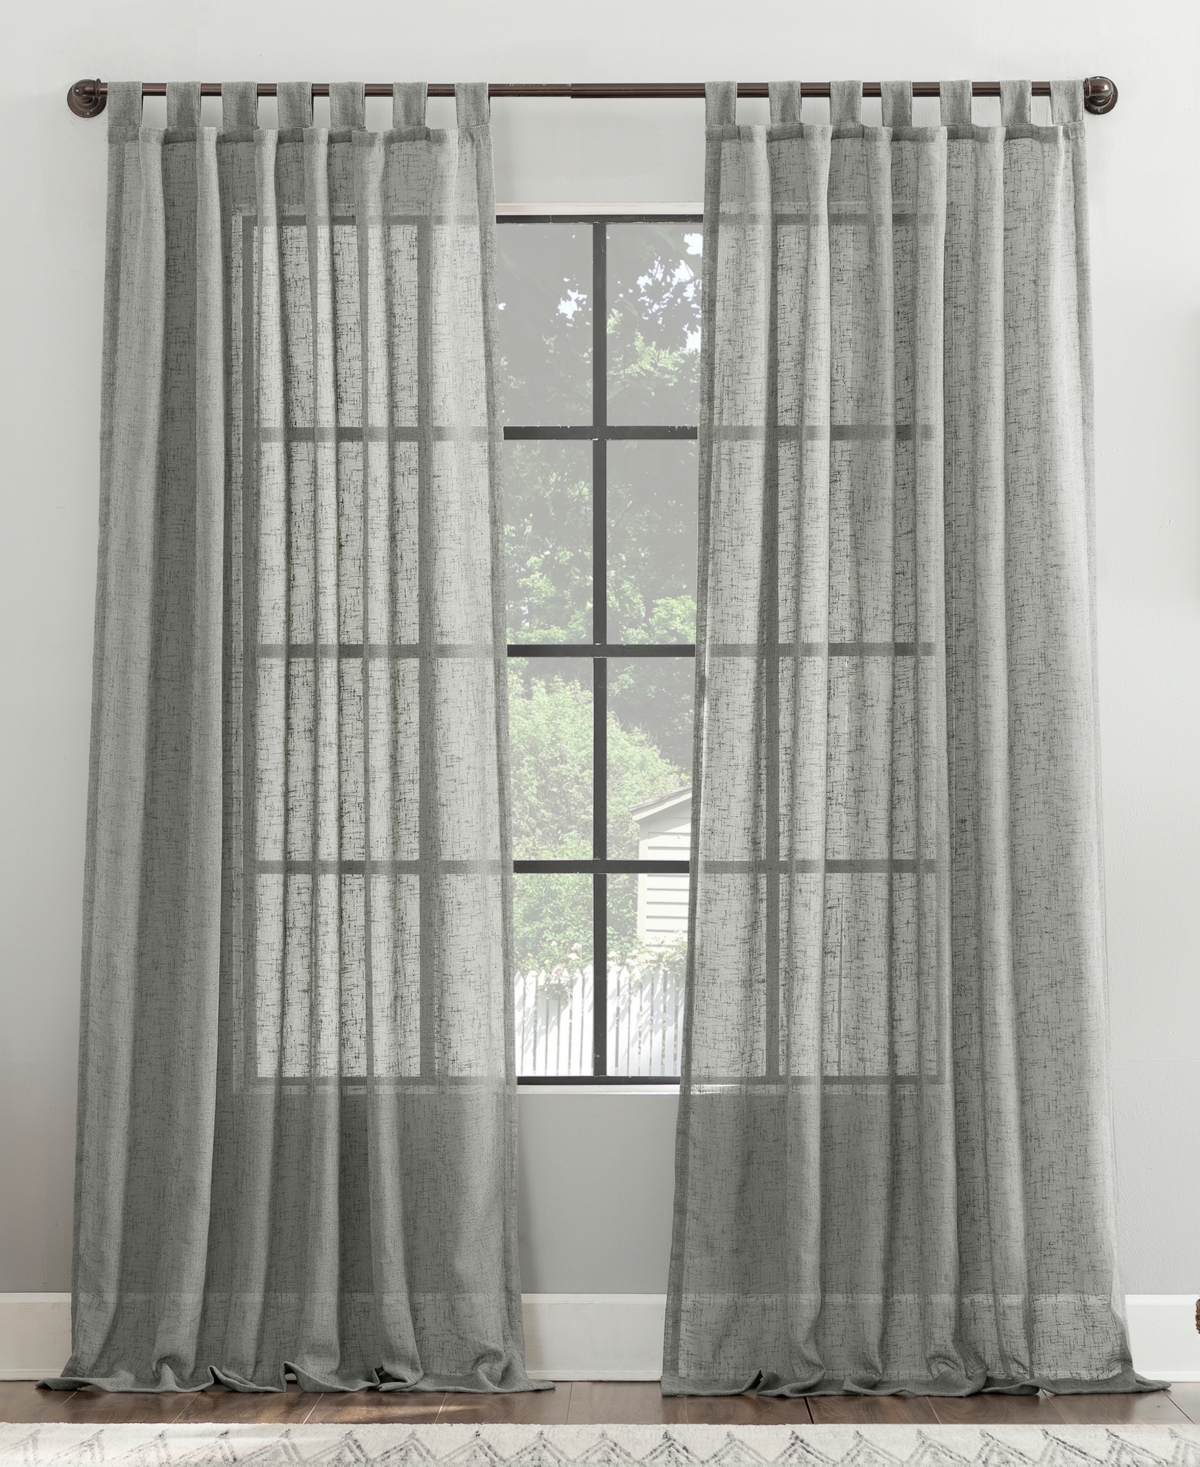 Archaeo Tansy Burlap Weave Tab Top Curtain Panel, 50"x 84" In Sterling